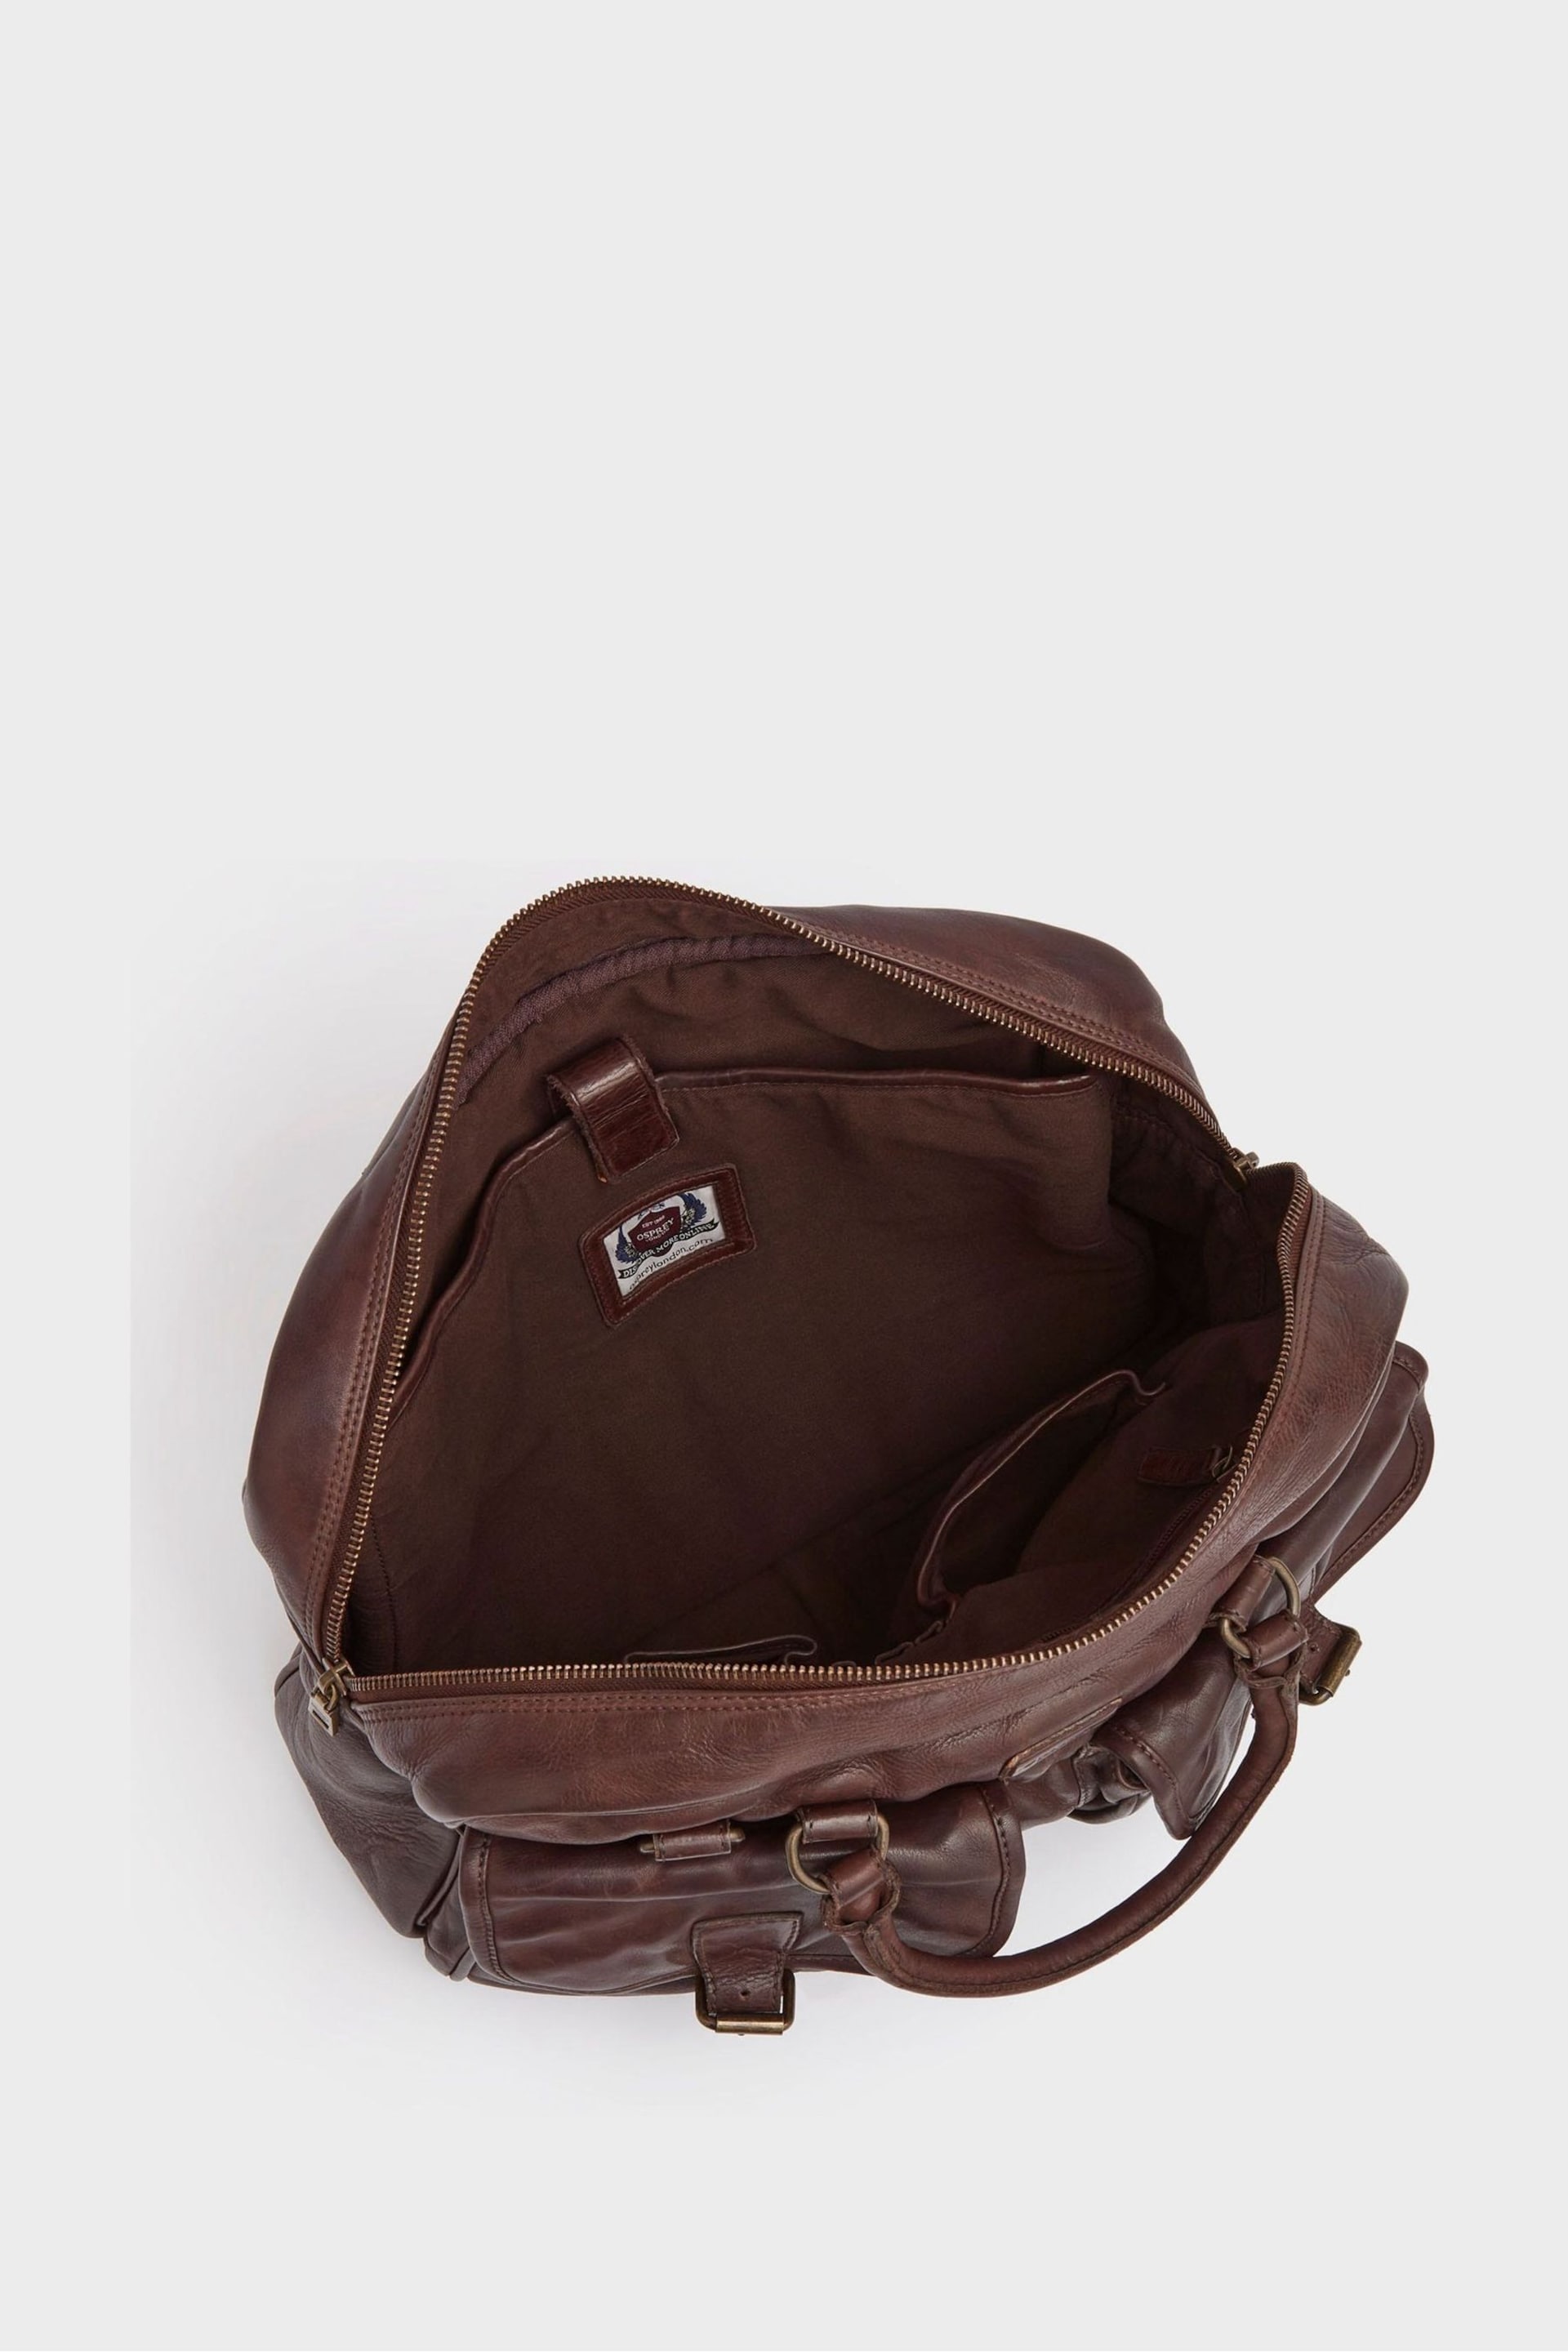 Osprey London Medium The Washed Leather Grip Brown Bag - Image 5 of 7